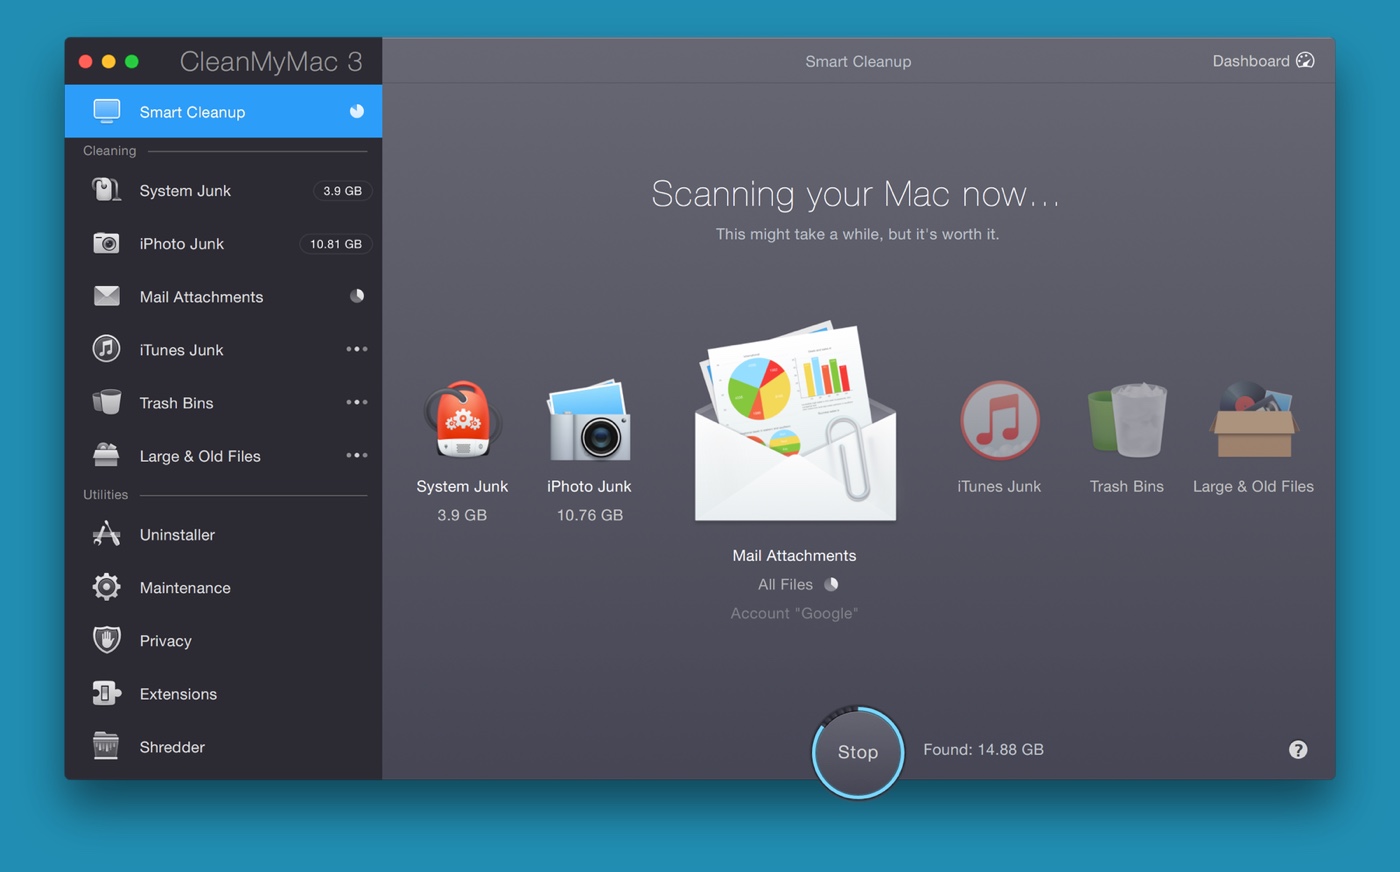 cleanmymac 3 activation key free